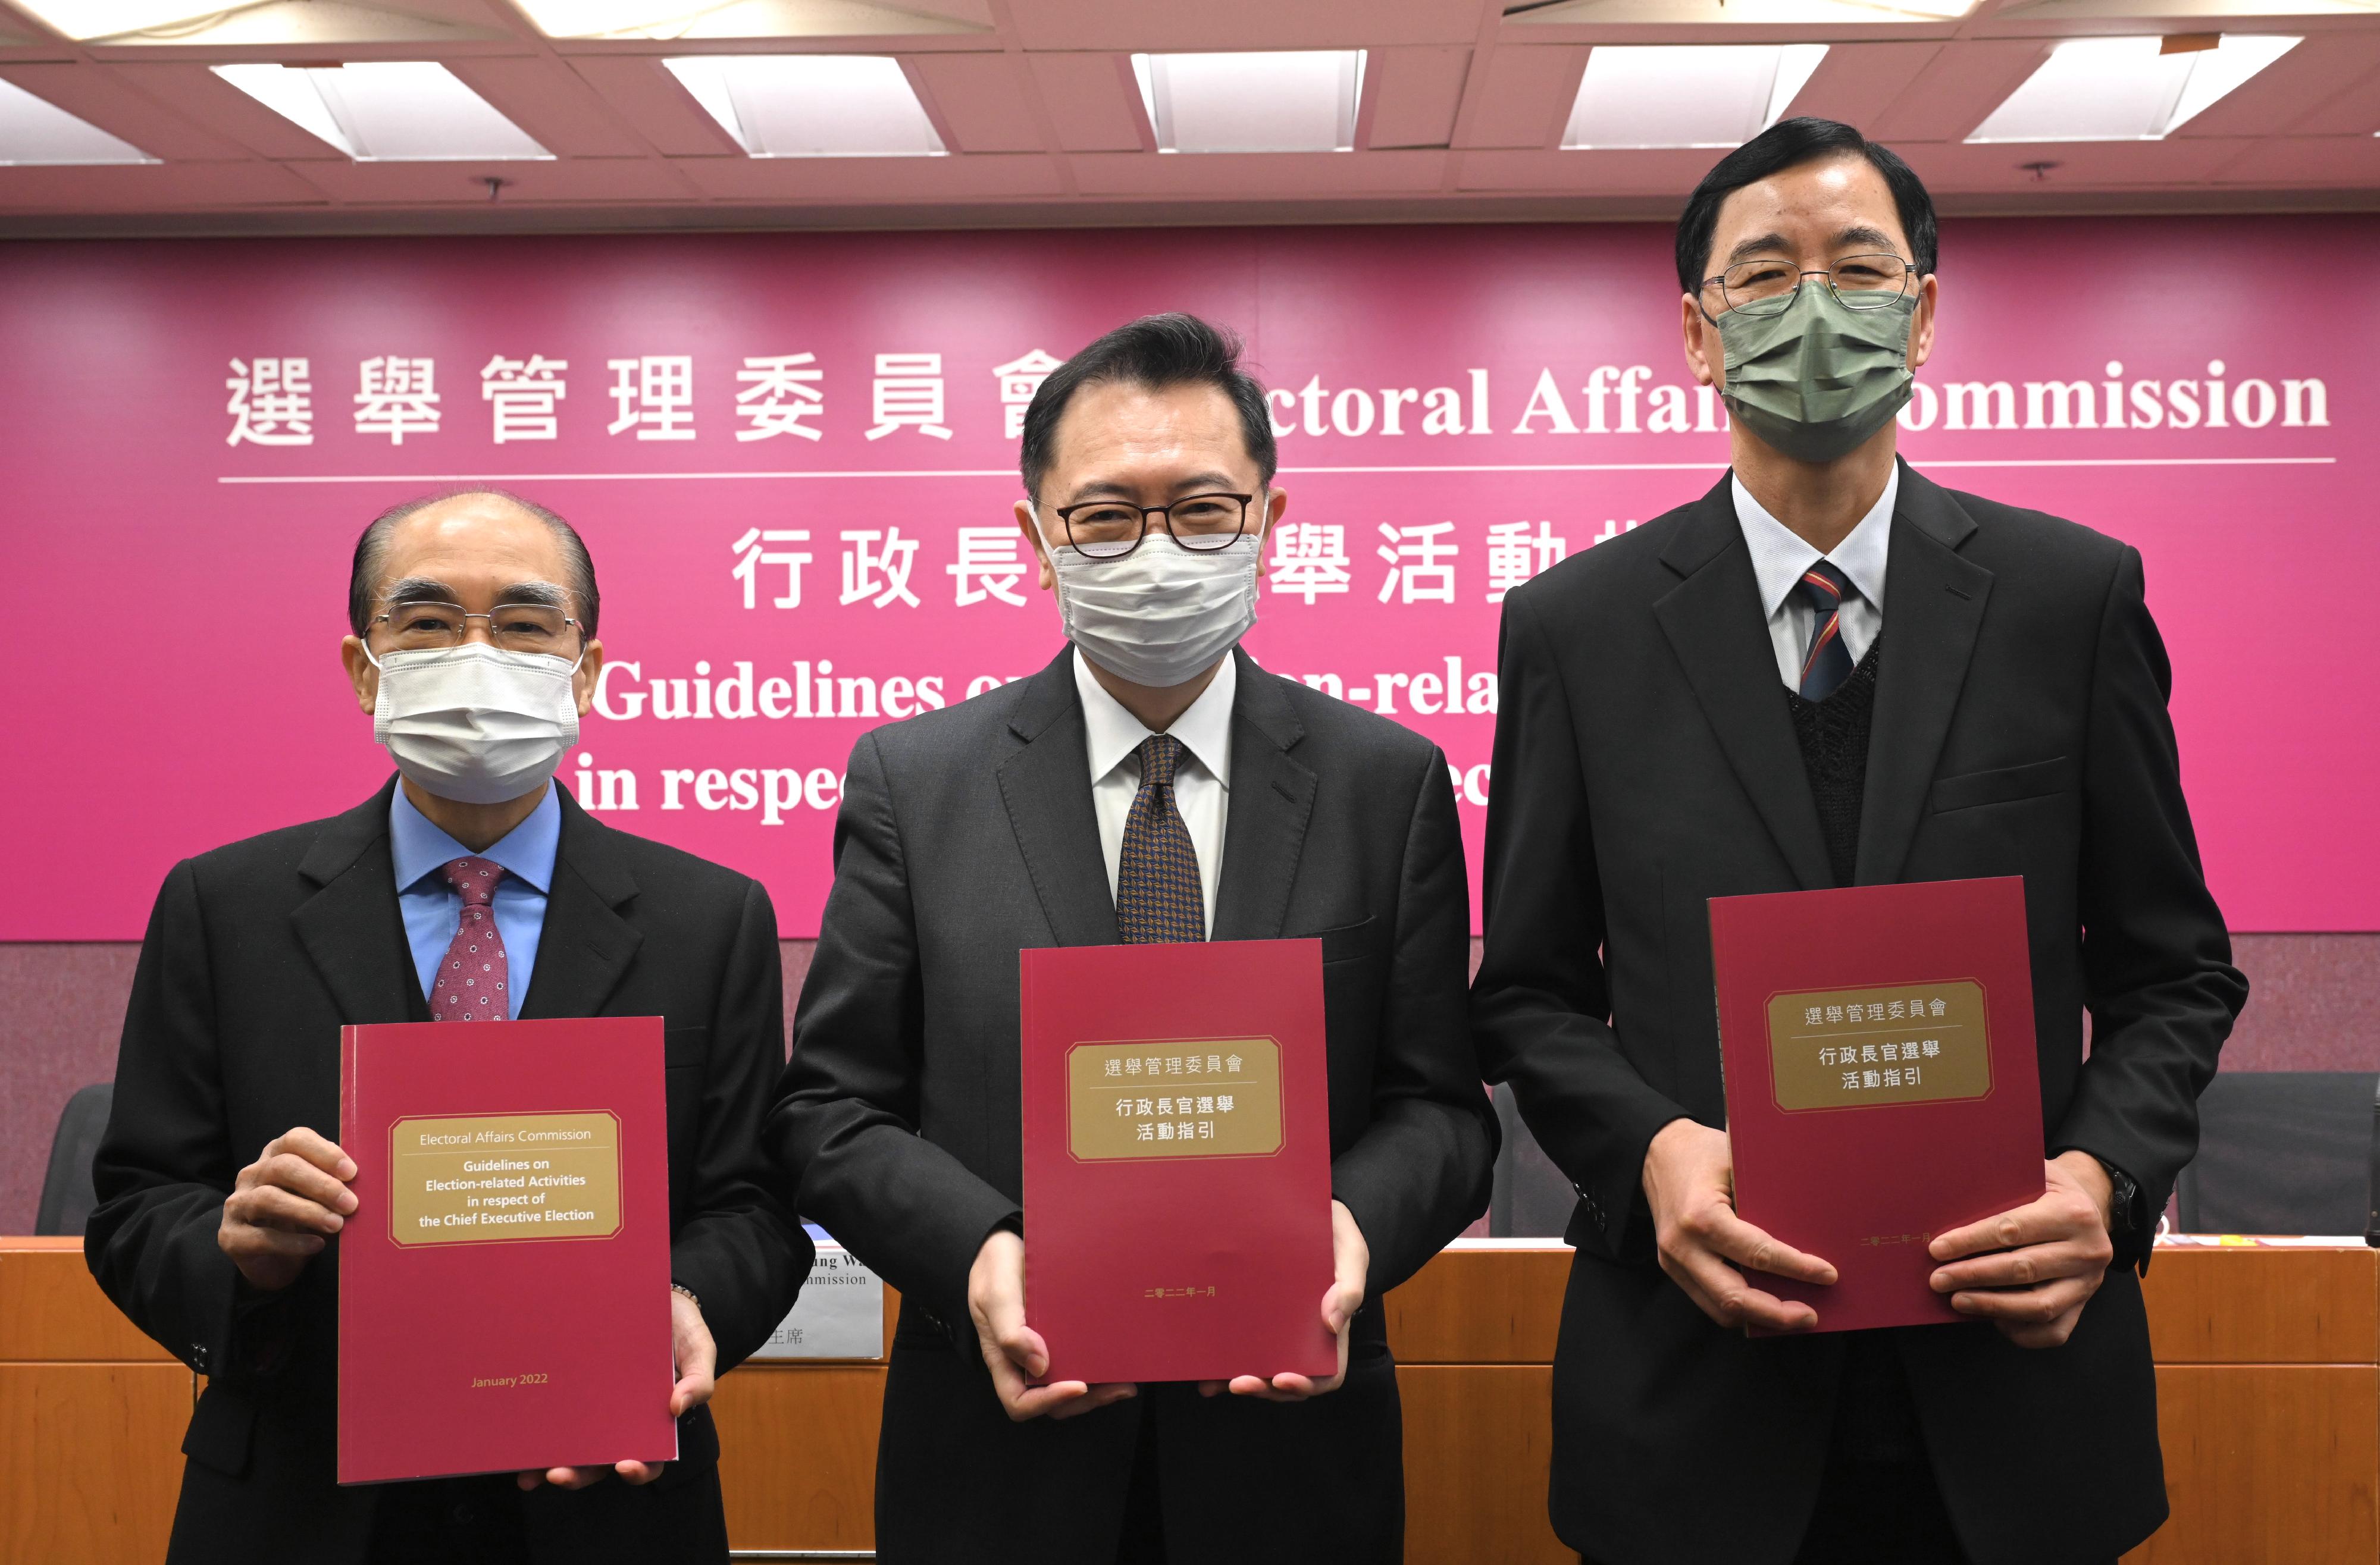 The Chairman of the Electoral Affairs Commission (EAC), Mr Justice Barnabas Fung Wah (centre), and EAC members Mr Arthur Luk, SC (left) and Professor Daniel Shek (right) present the Guidelines on Election-related Activities in respect of the Chief Executive Election at a press conference today (January 27).